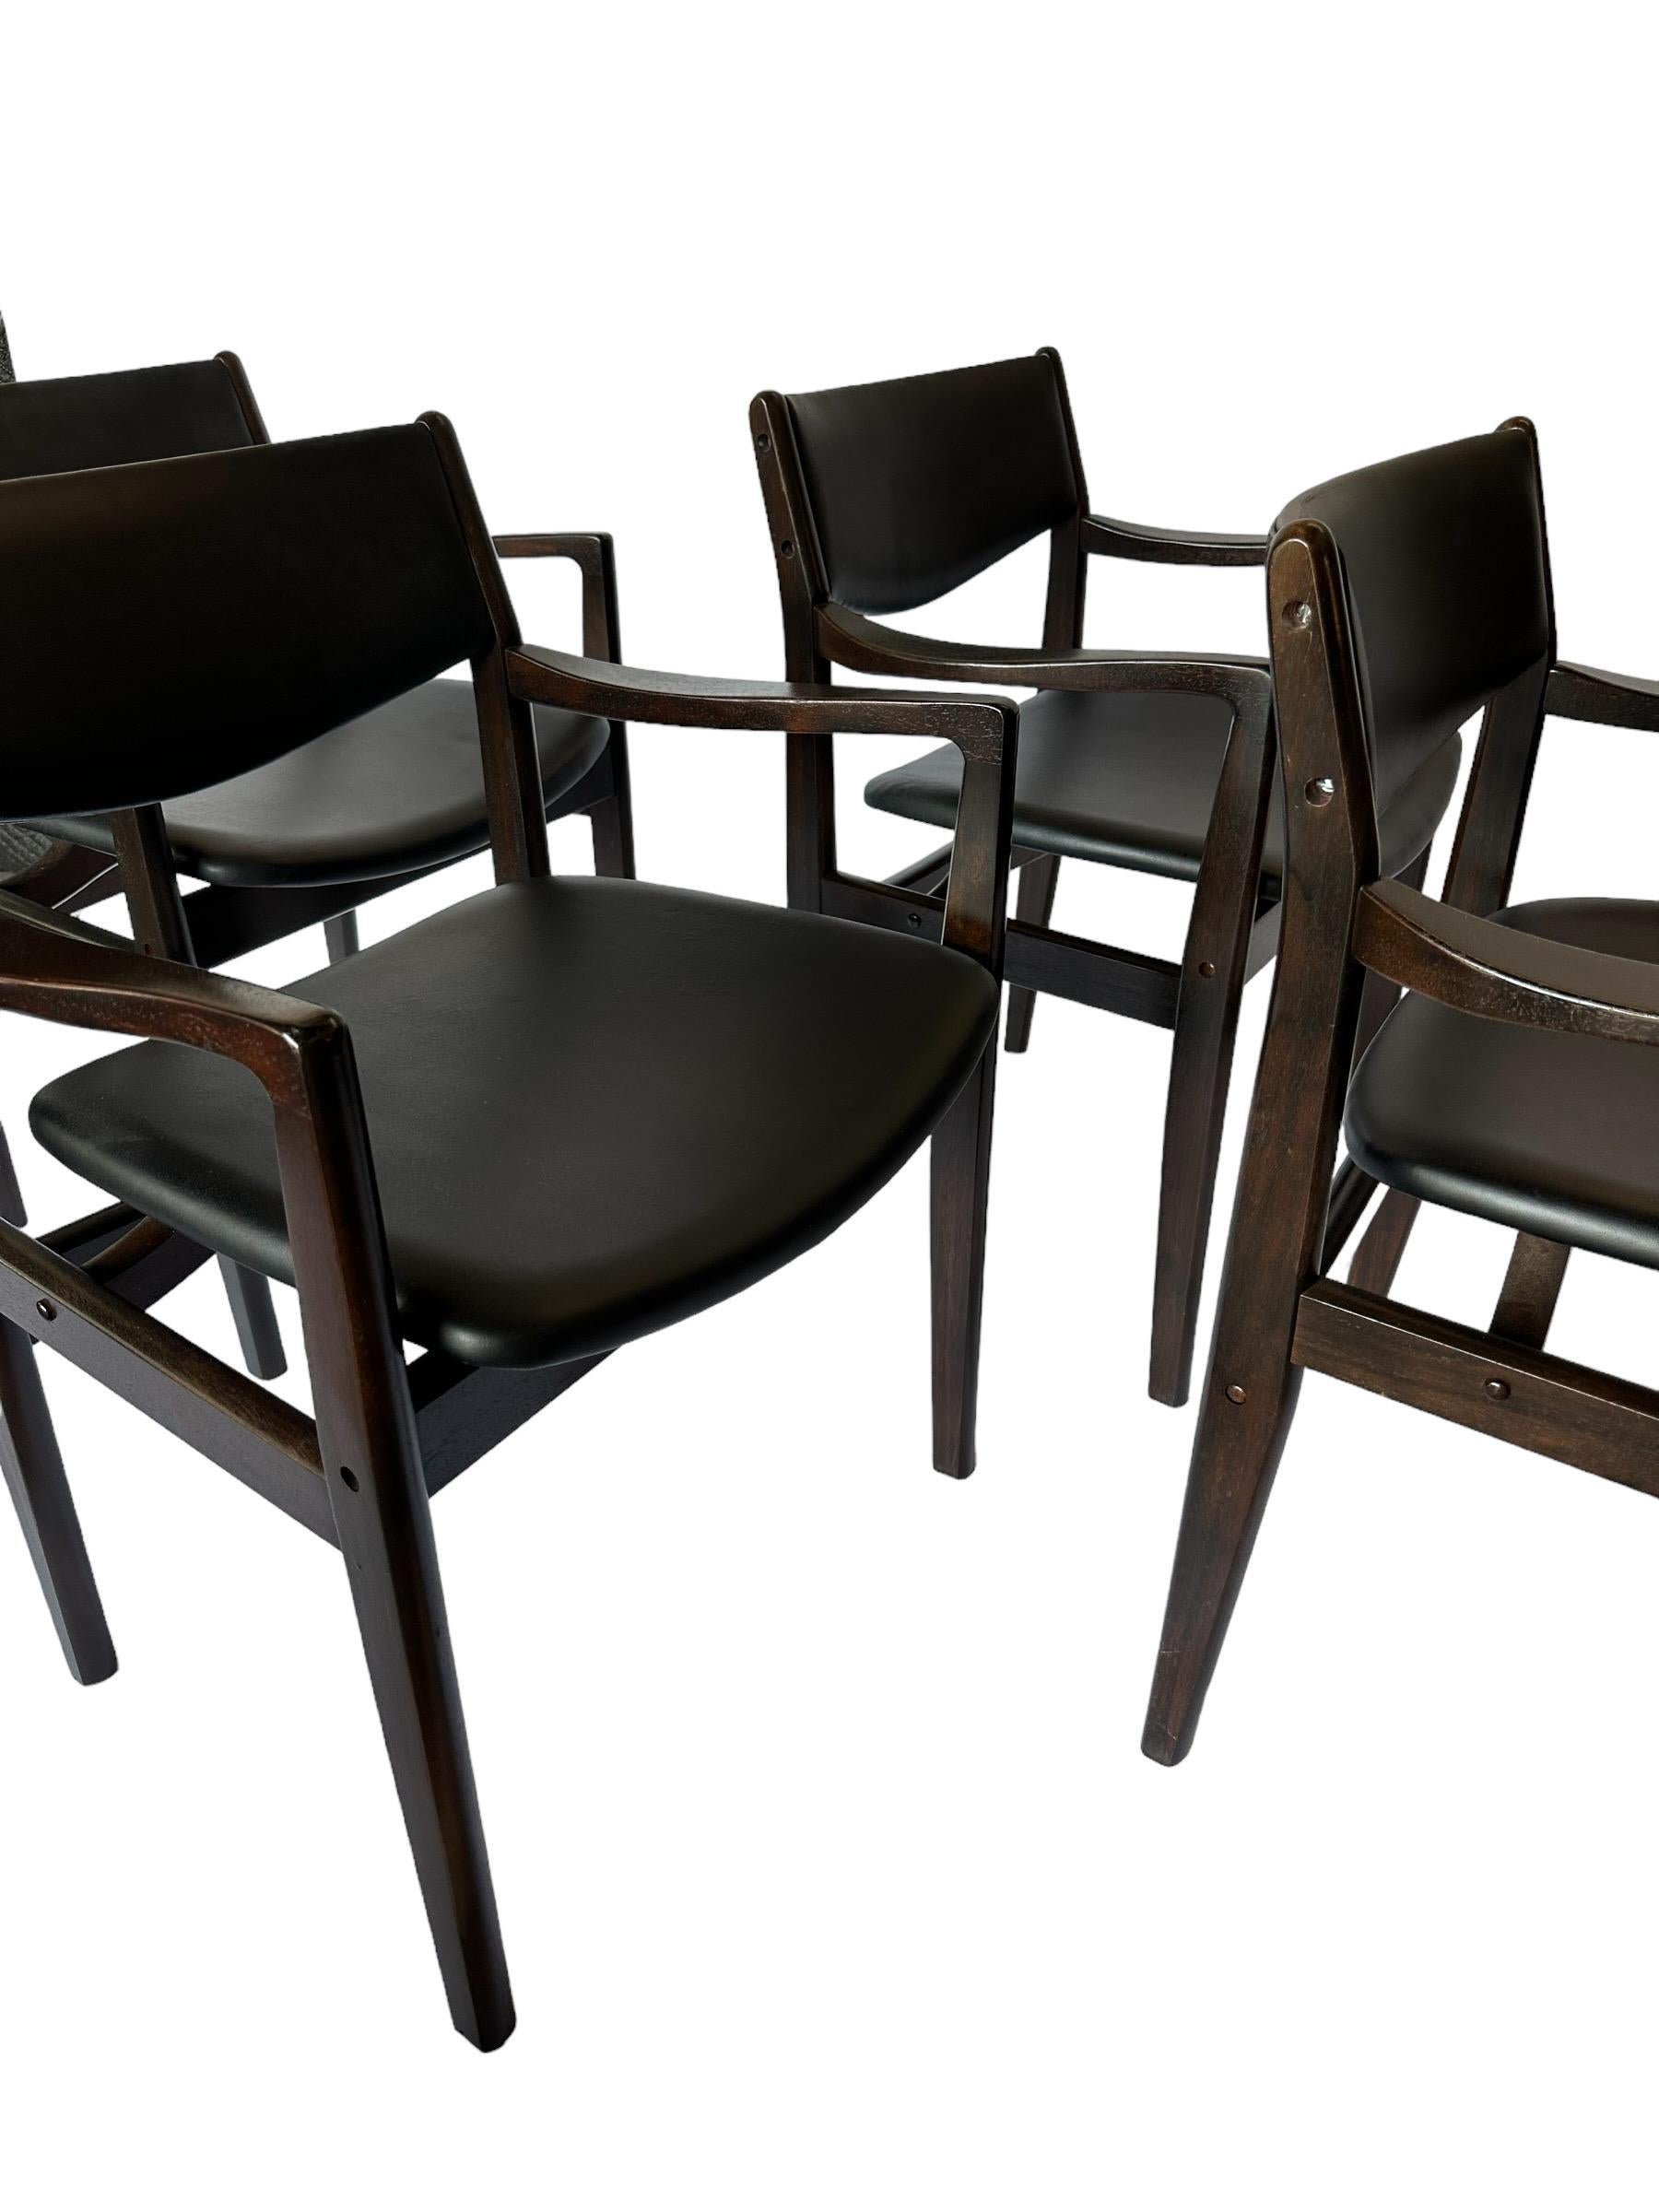 Set of 4 Midcentury Modern Danish Style Hardwood Dining Chairs For Sale 6